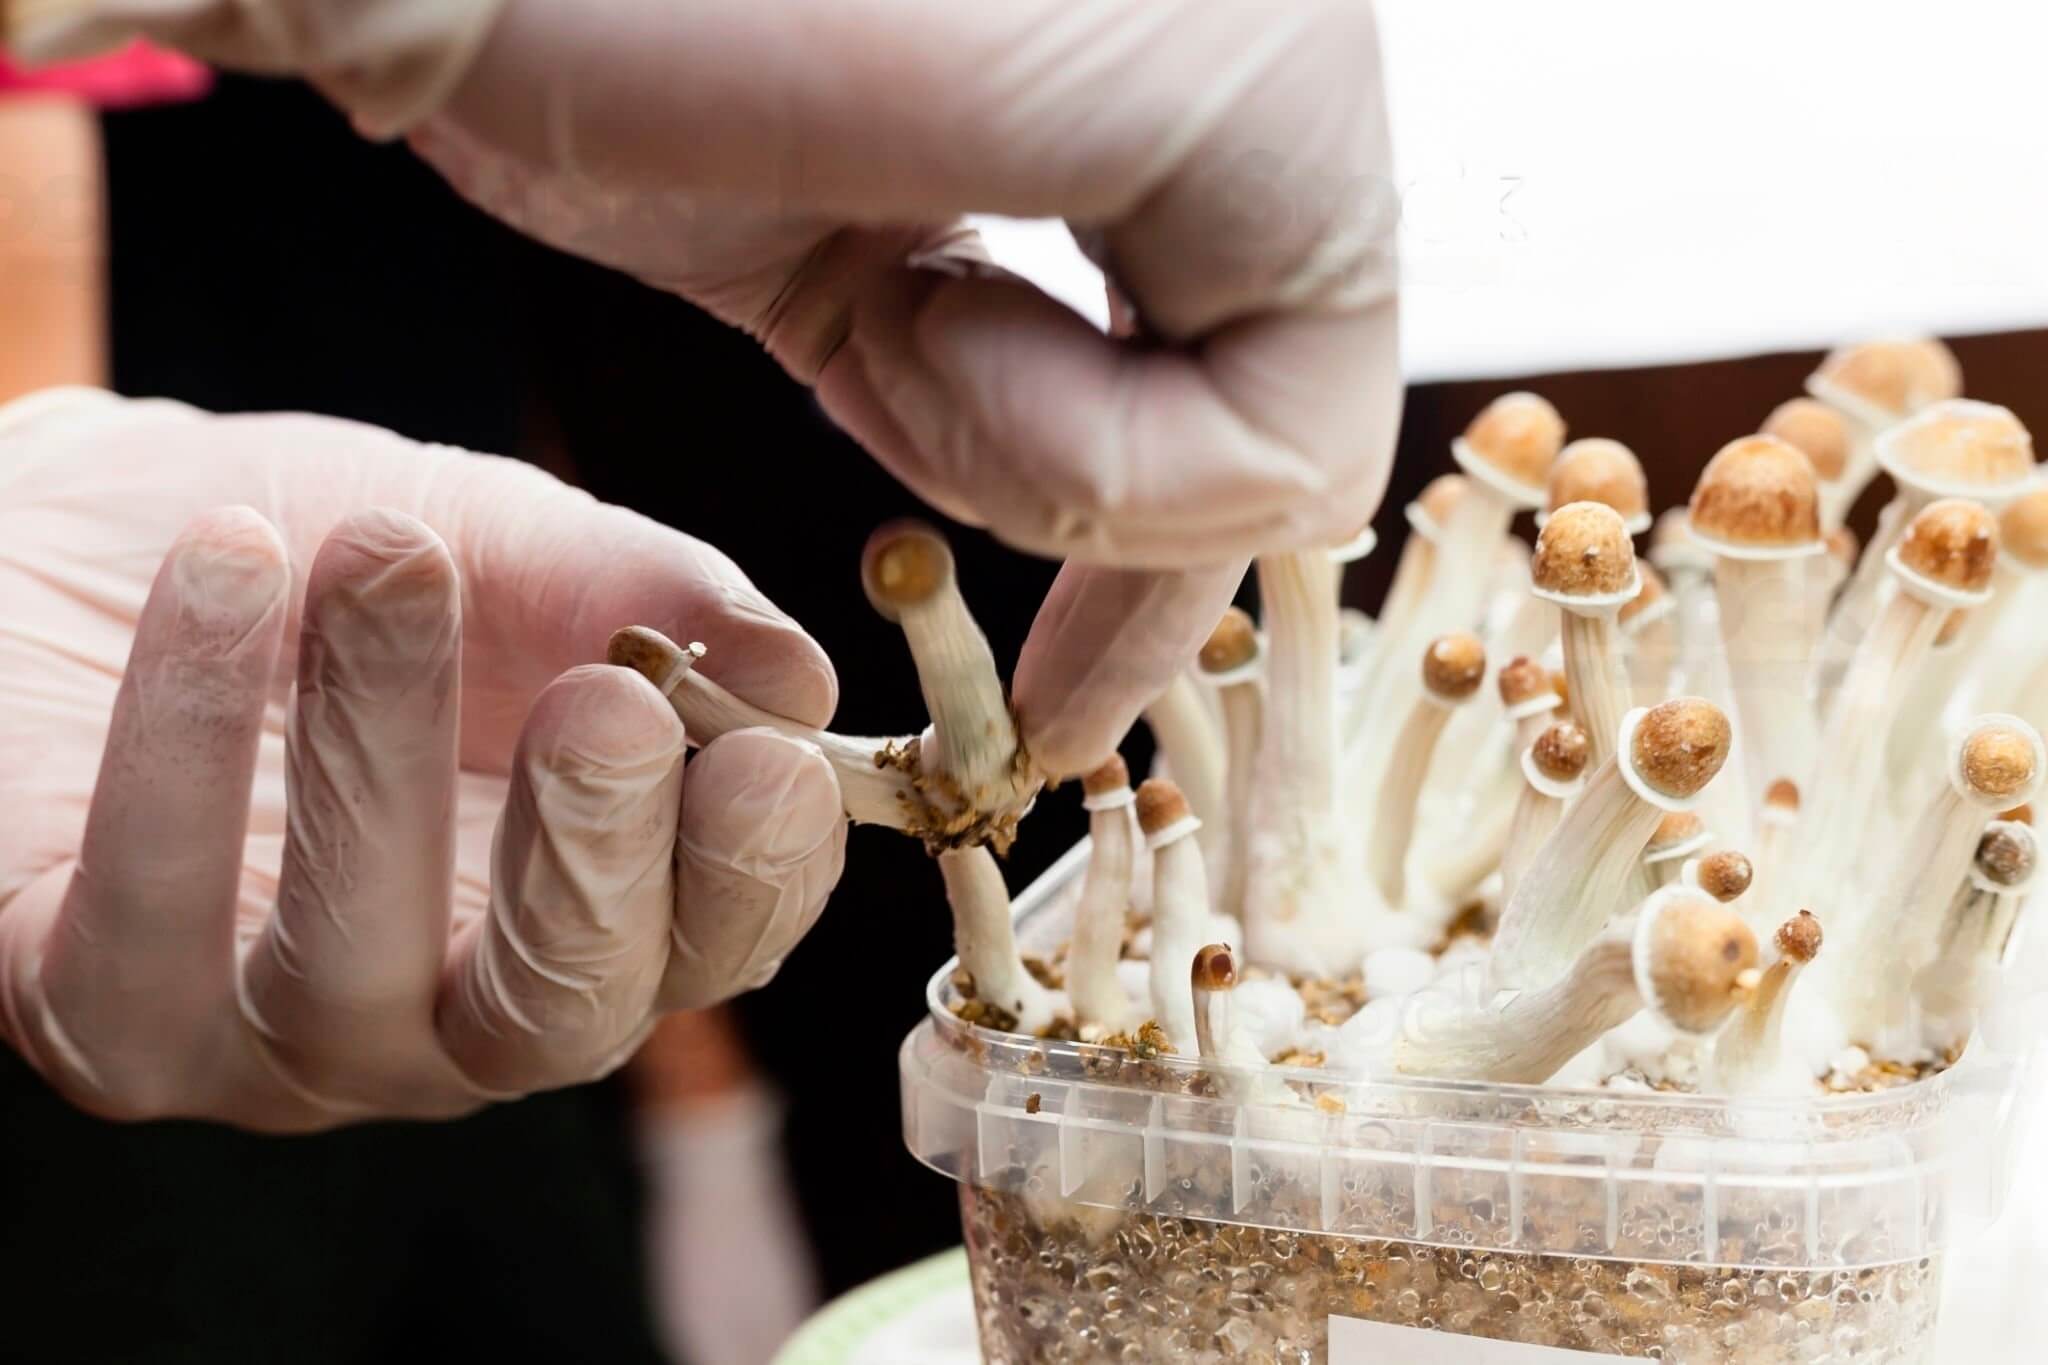 Mushroom Mycelium: What It Is & How It Can Be Useful to Humans